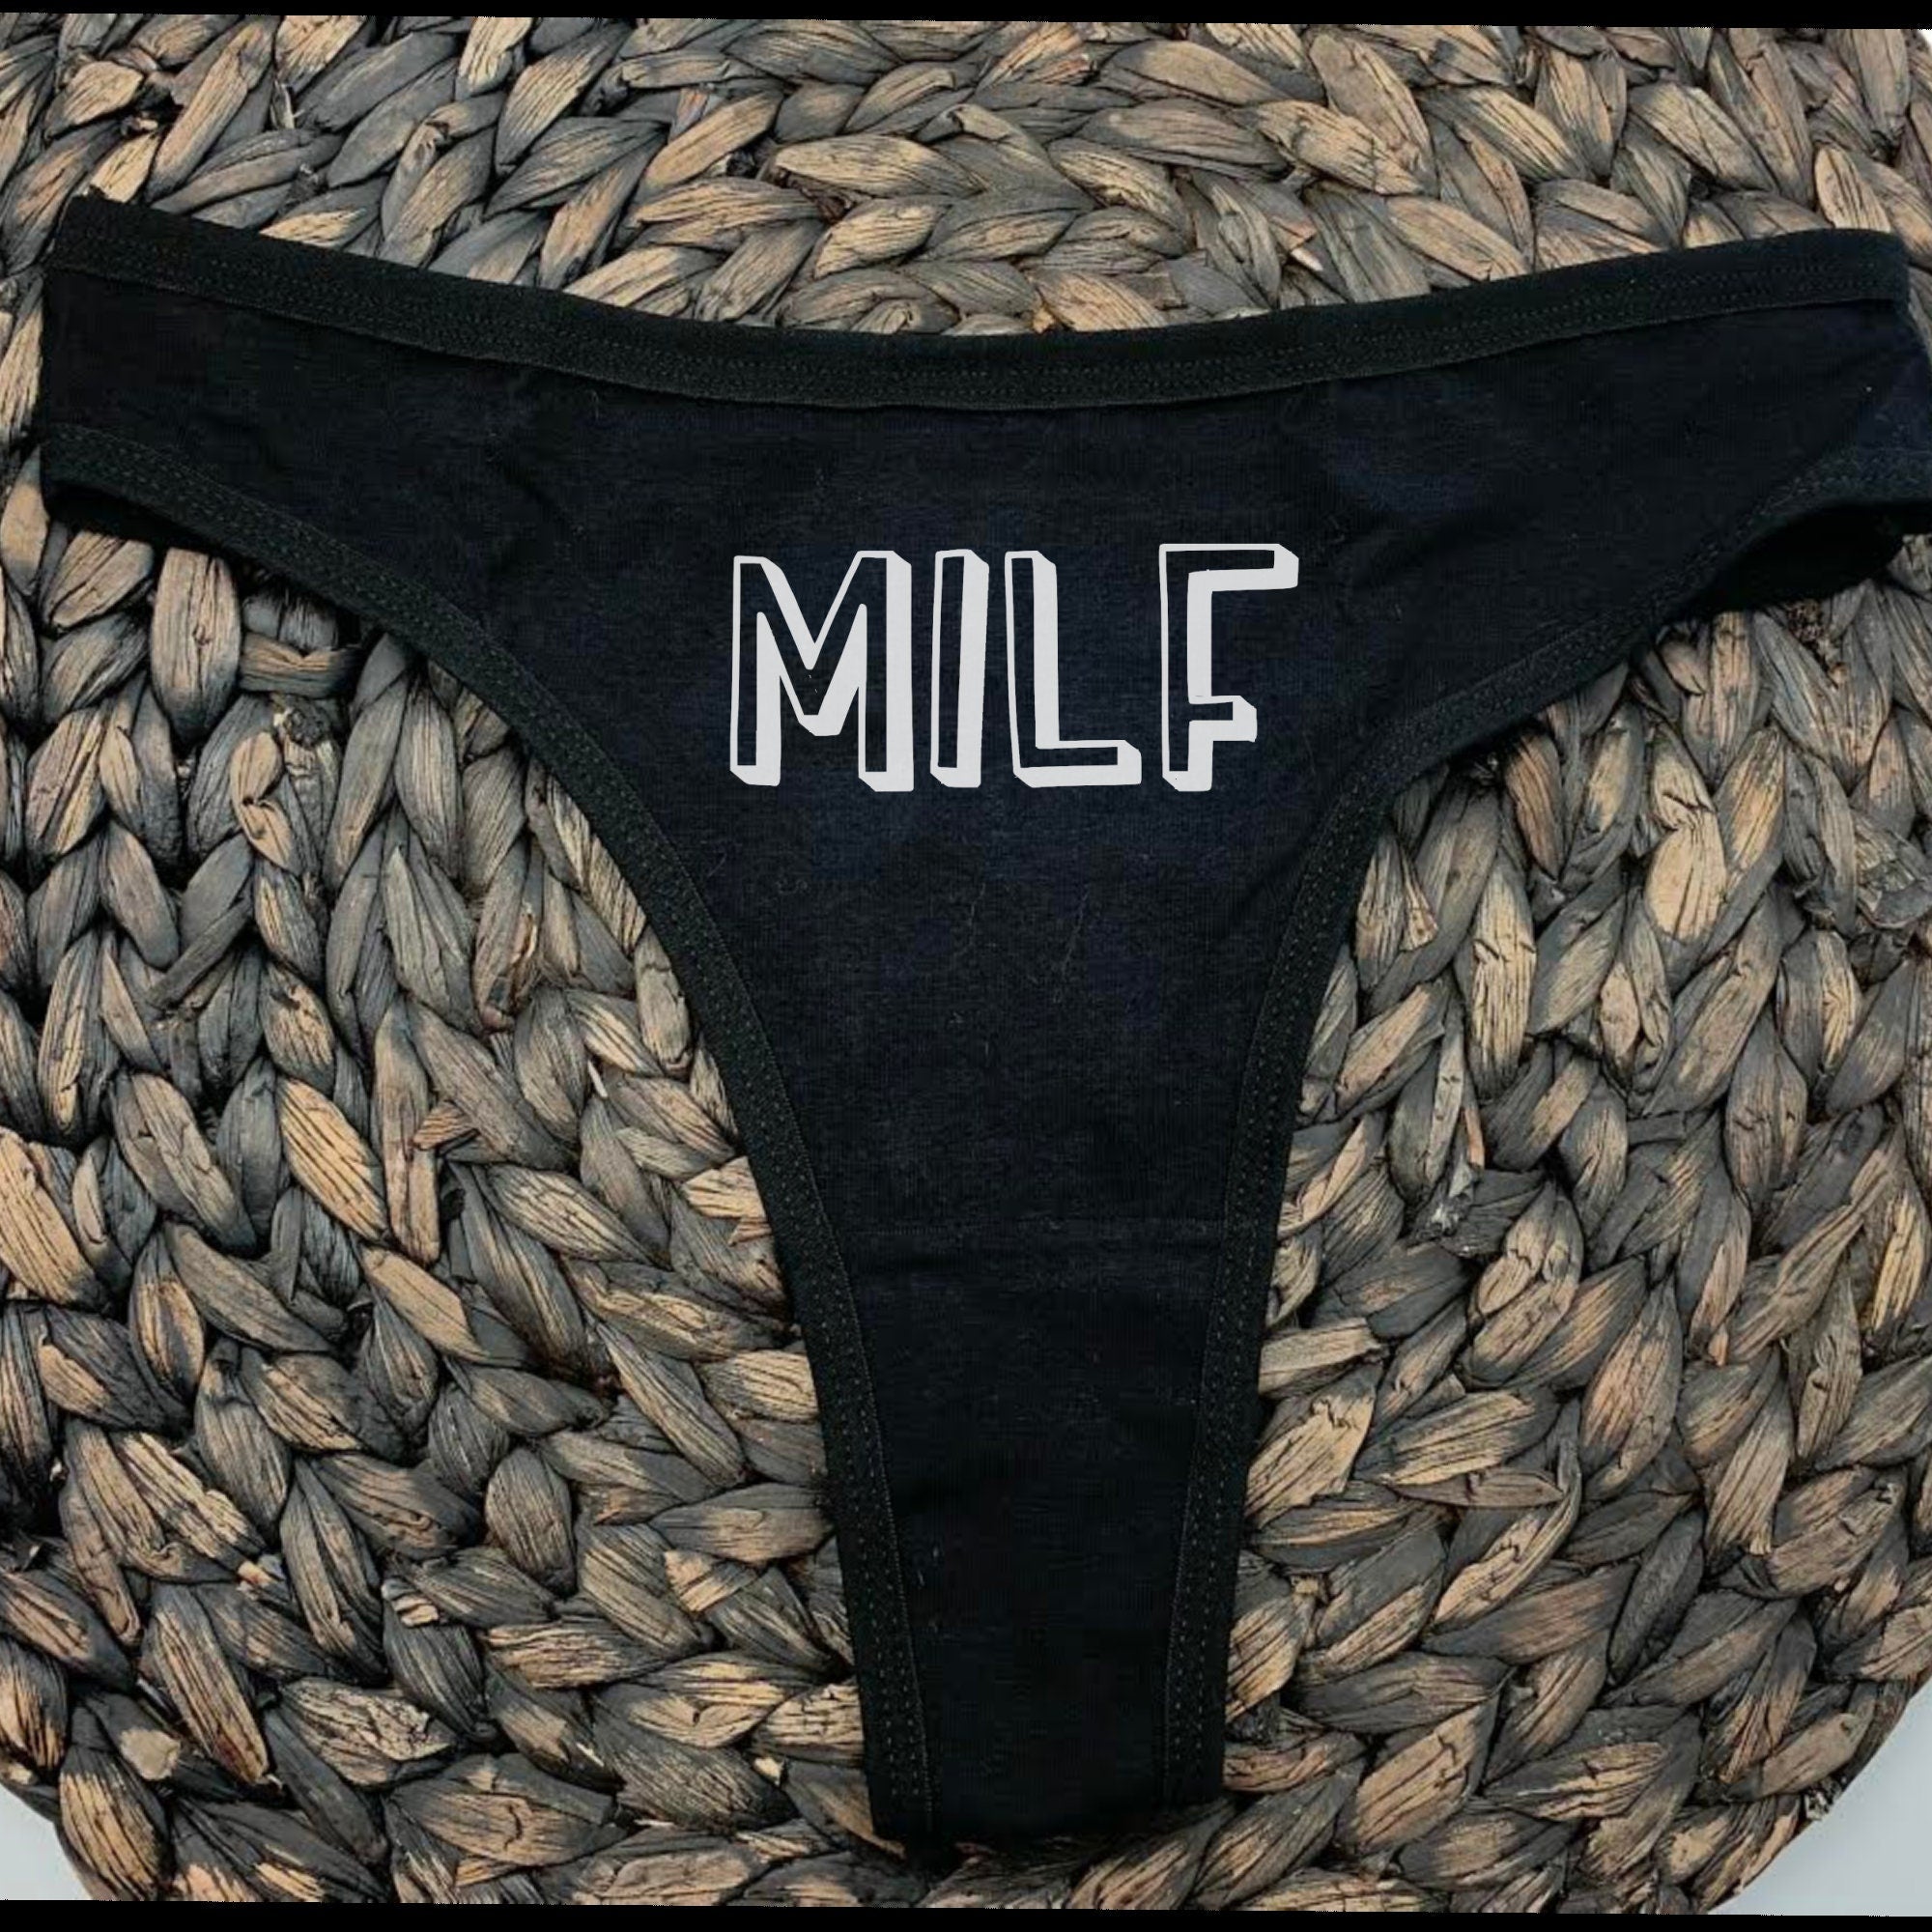 Funny MILF Thong Gift - Humorous Mom Present - Unique Gifts for Her